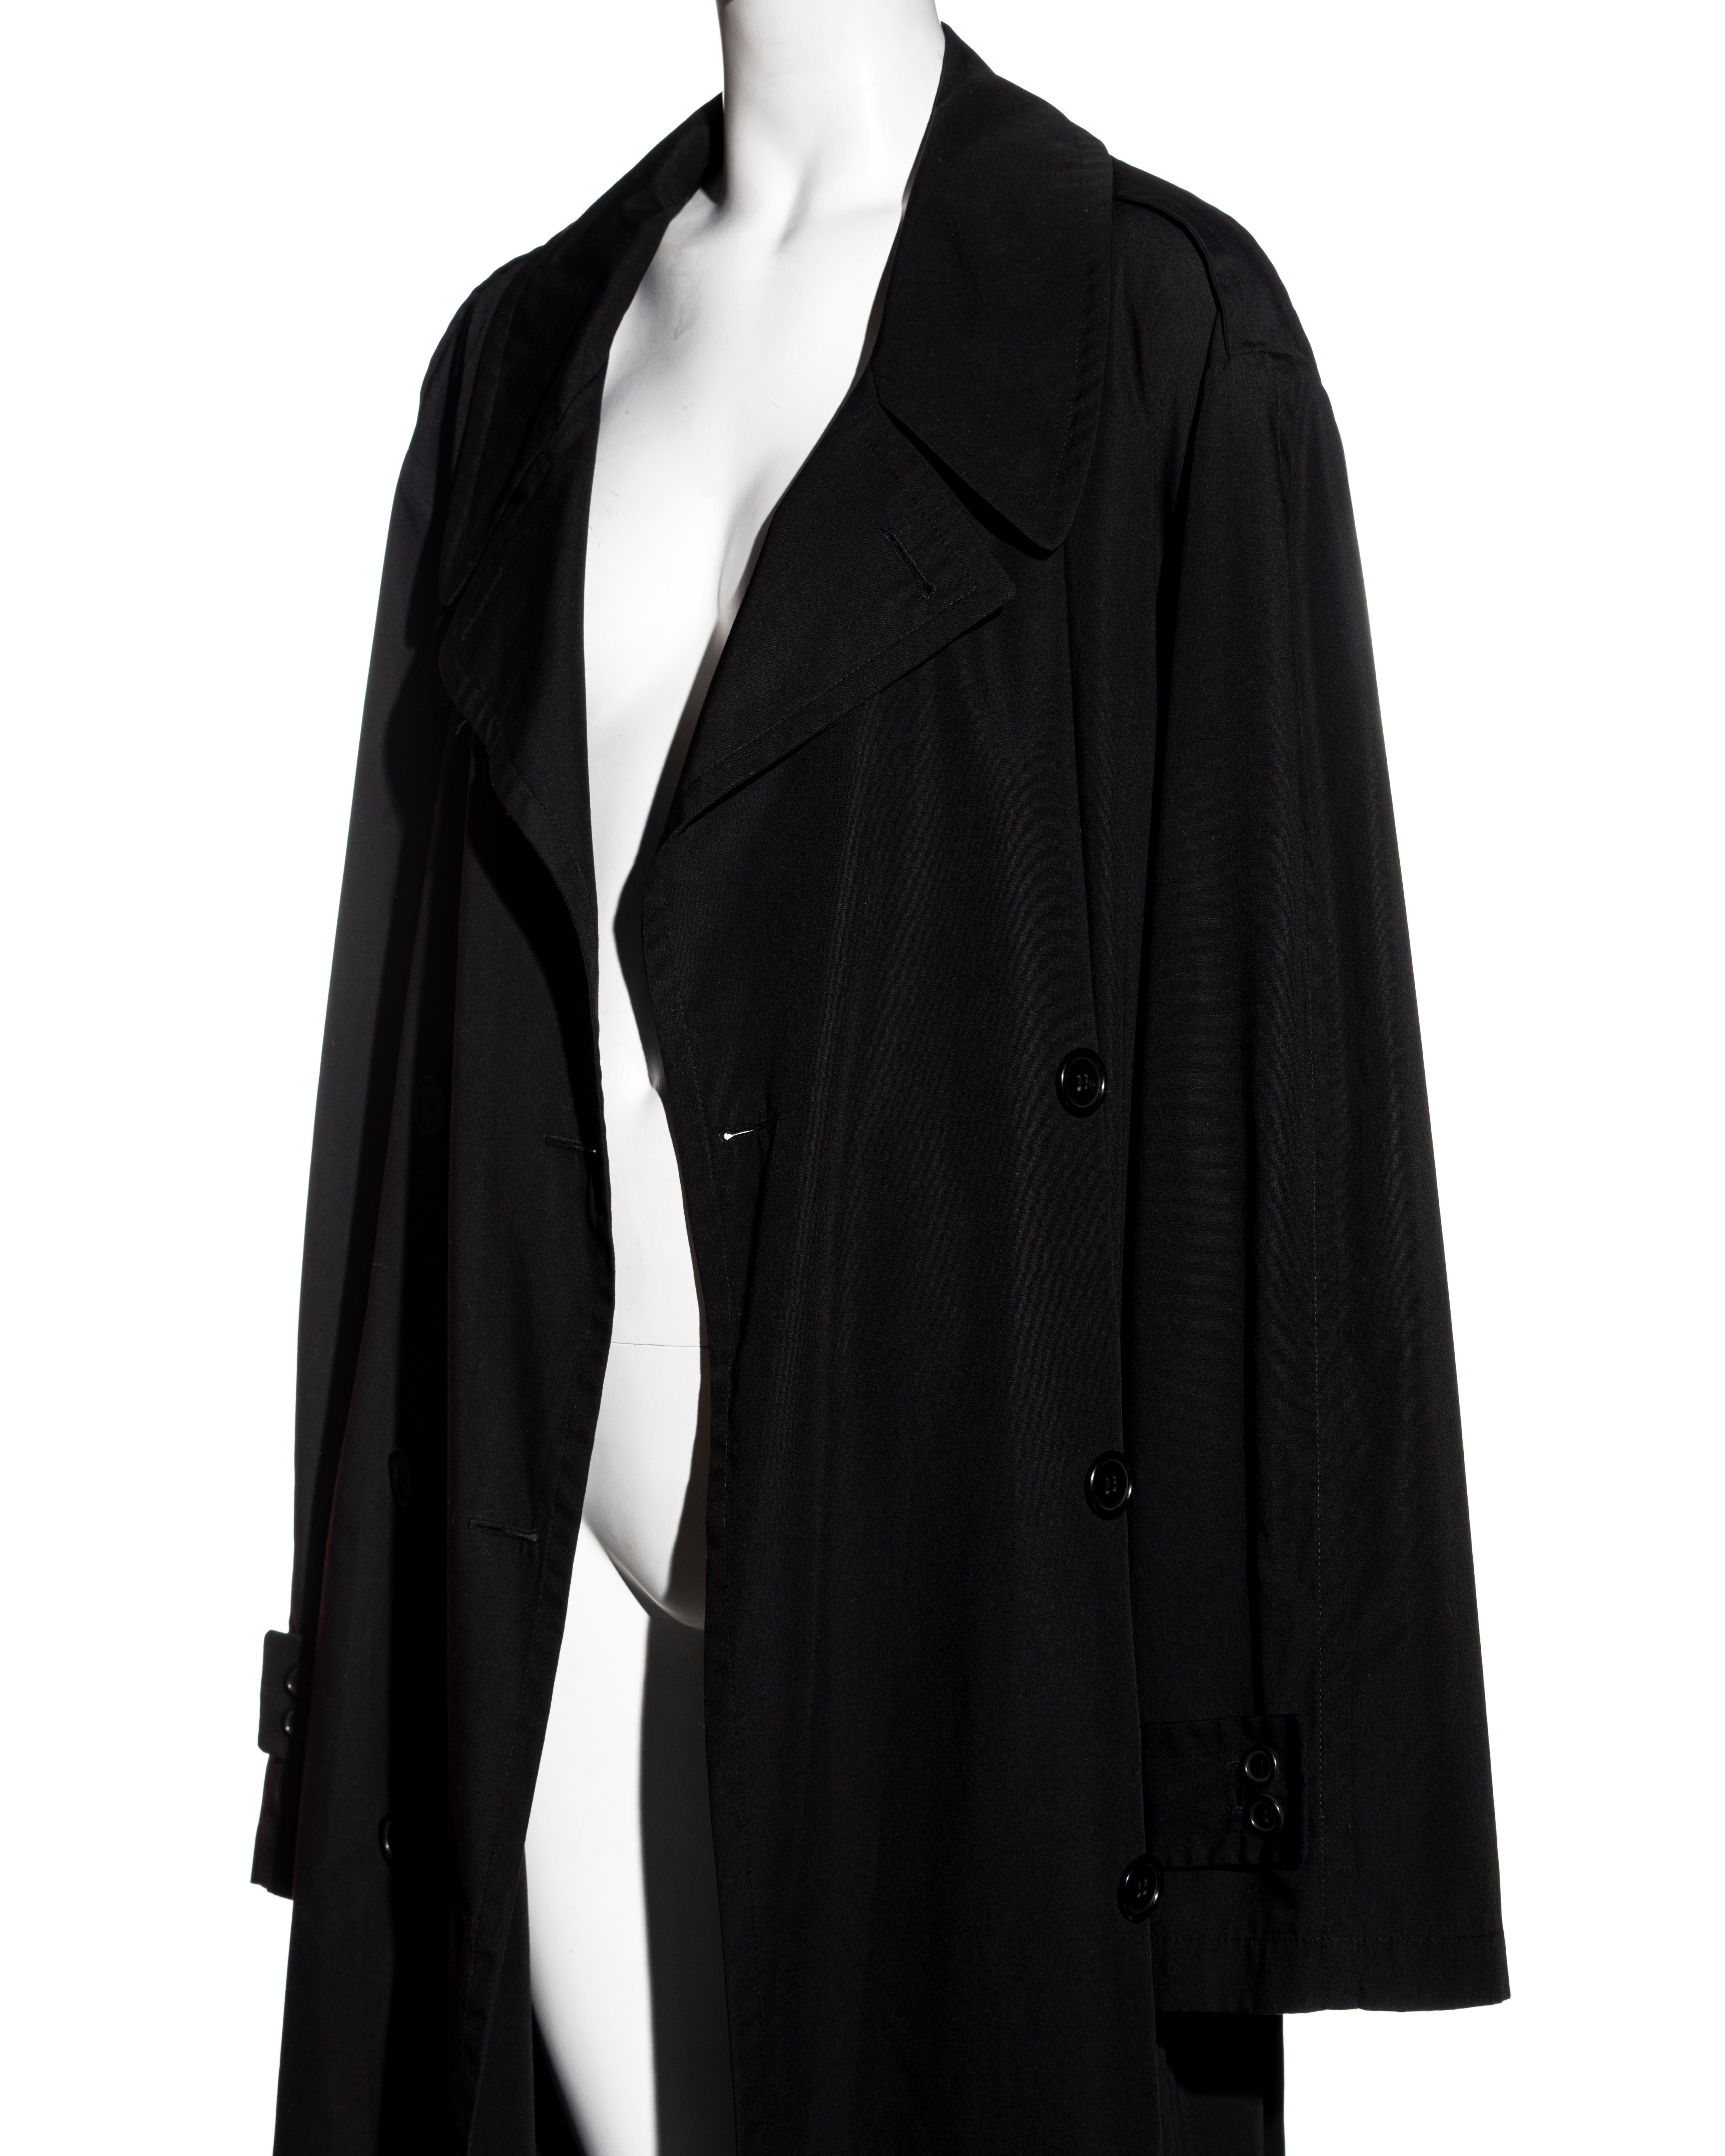 Martin Margiela black oversized size 74 trench coat, ss 2000 In Excellent Condition For Sale In London, GB